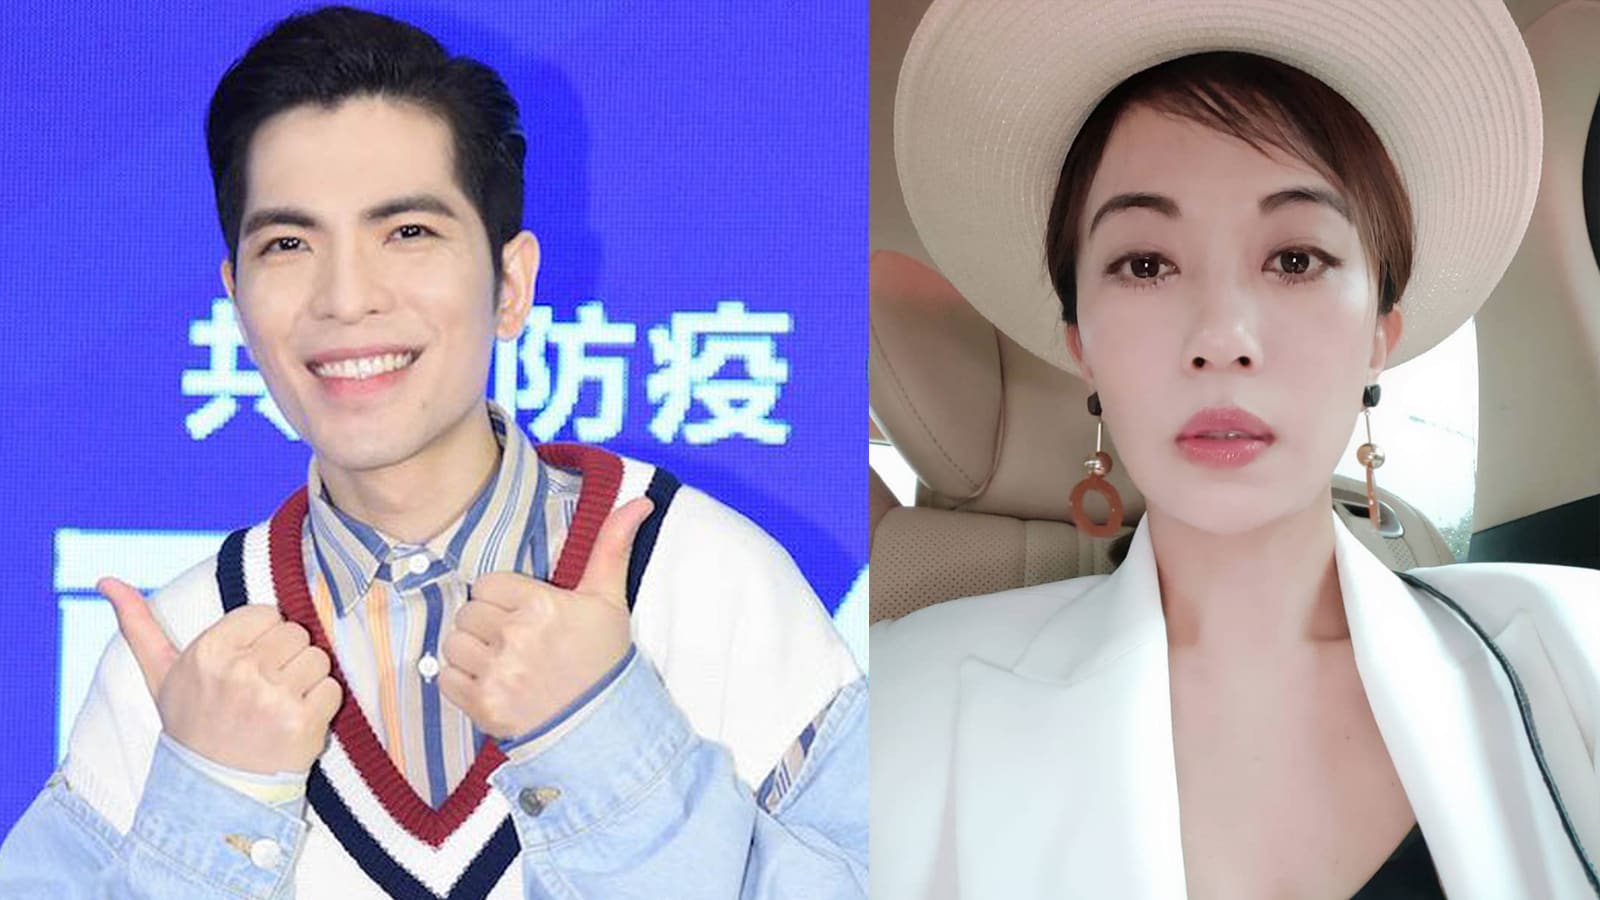 Jam Hsiao Says He “Can’t Talk About” Whether He’s Dating His Manager